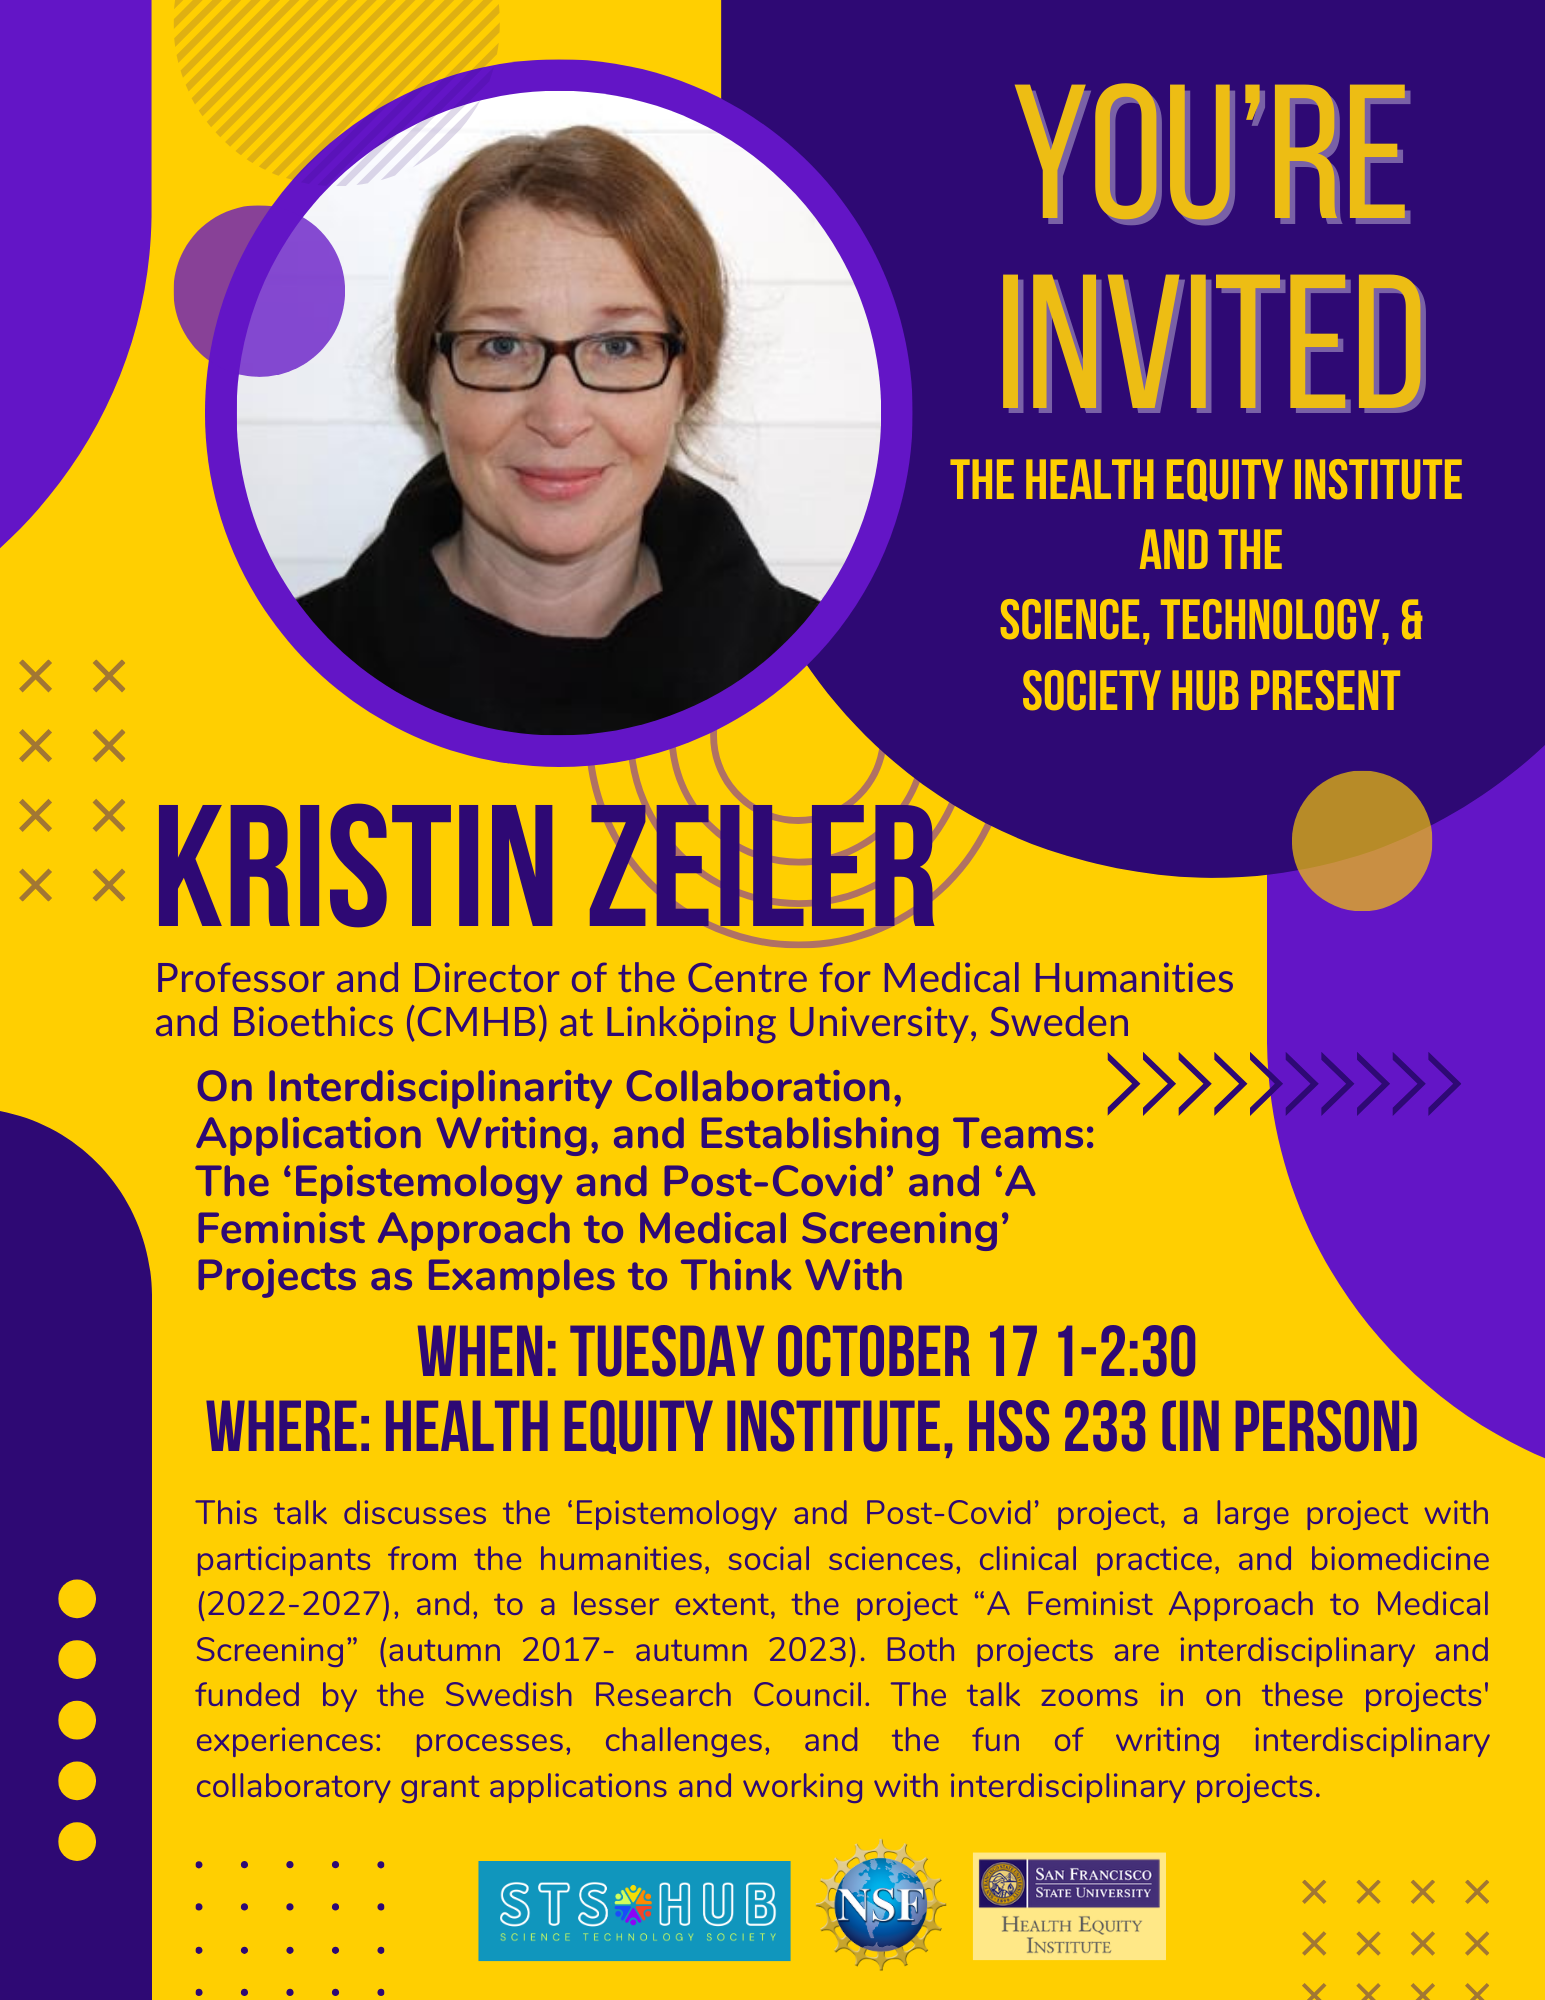 A purple and gold flyer with a headshot that reads You're Invited, The Health Equity Institute  and THE Science, Technology, & Society Hub present, Kristin Zeiler, Professor and Director of the Centre for Medical Humanities and Bioethics (CMHB) at Linköping University, Sweden, On Interdisciplinarity Collaboration, Application Writing, and Establishing Teams:  The ‘Epistemology and Post-Covid’ and ‘A Feminist Approach to Medical Screening’ Projects as Examples to Think With, When: Tuesday October 17 1-2:30  